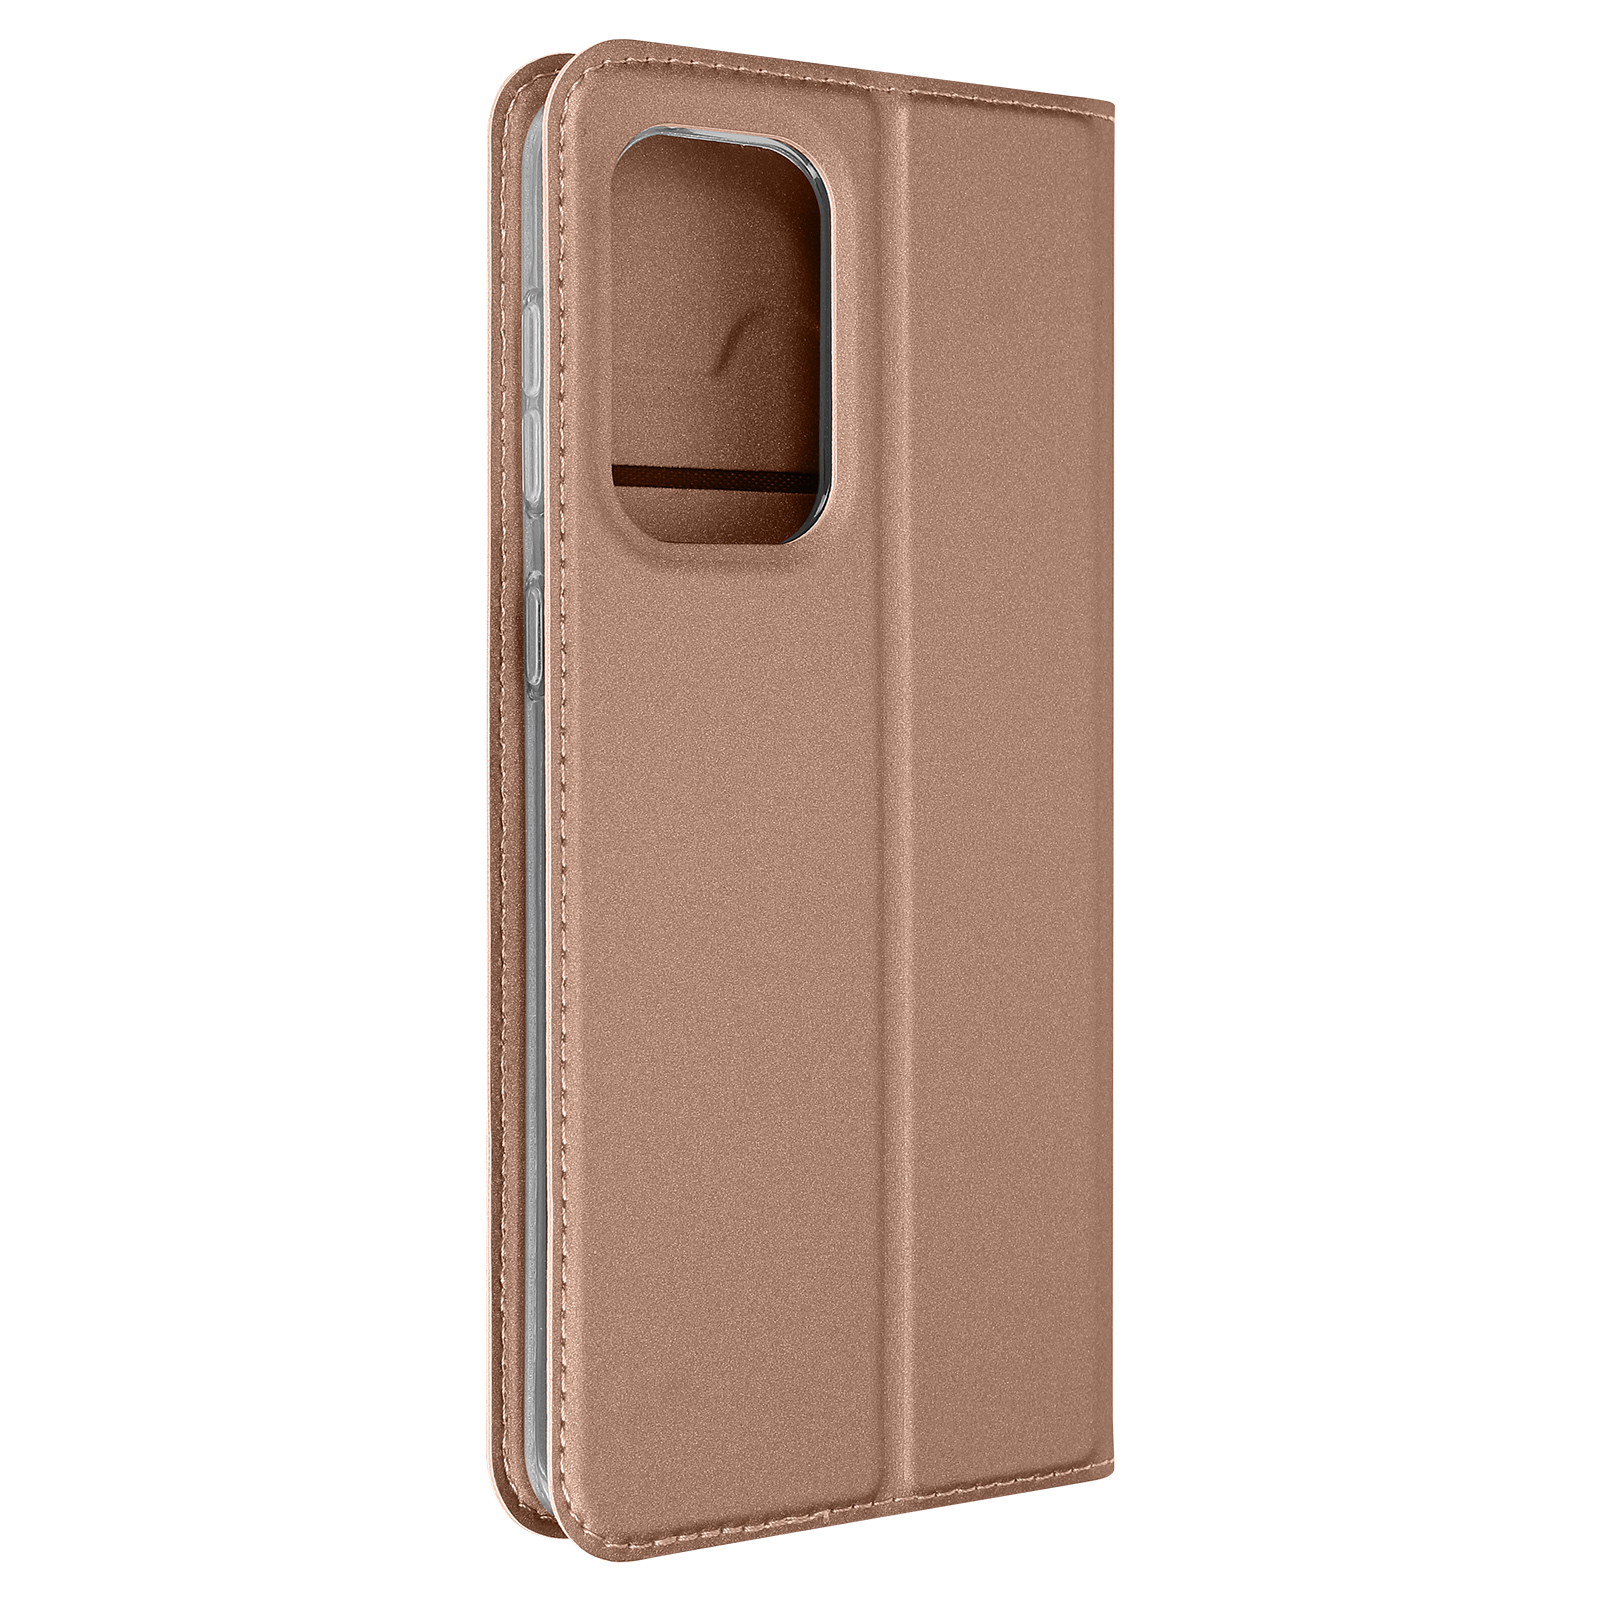 A33 DUX Bookcover, Rosegold DUCIS Pro Series, Galaxy Samsung, 5G,